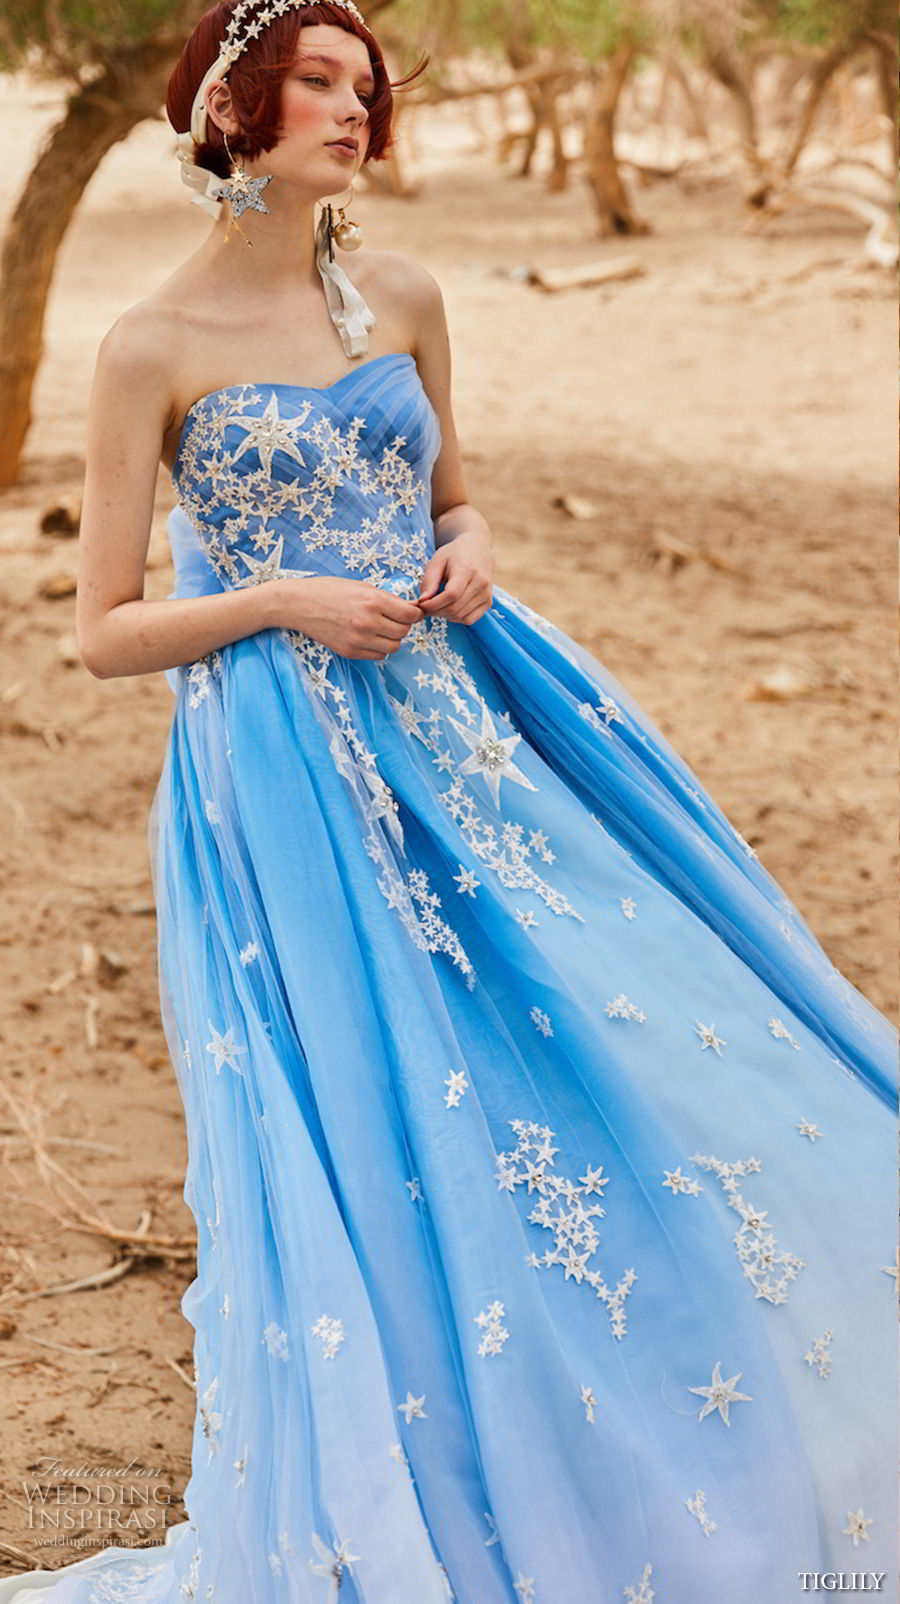 ❤️ 100 Stunning Blue Wedding Dresses For Your Special Day | Colored wedding  dress, Buy wedding dress online, Blue wedding dresses